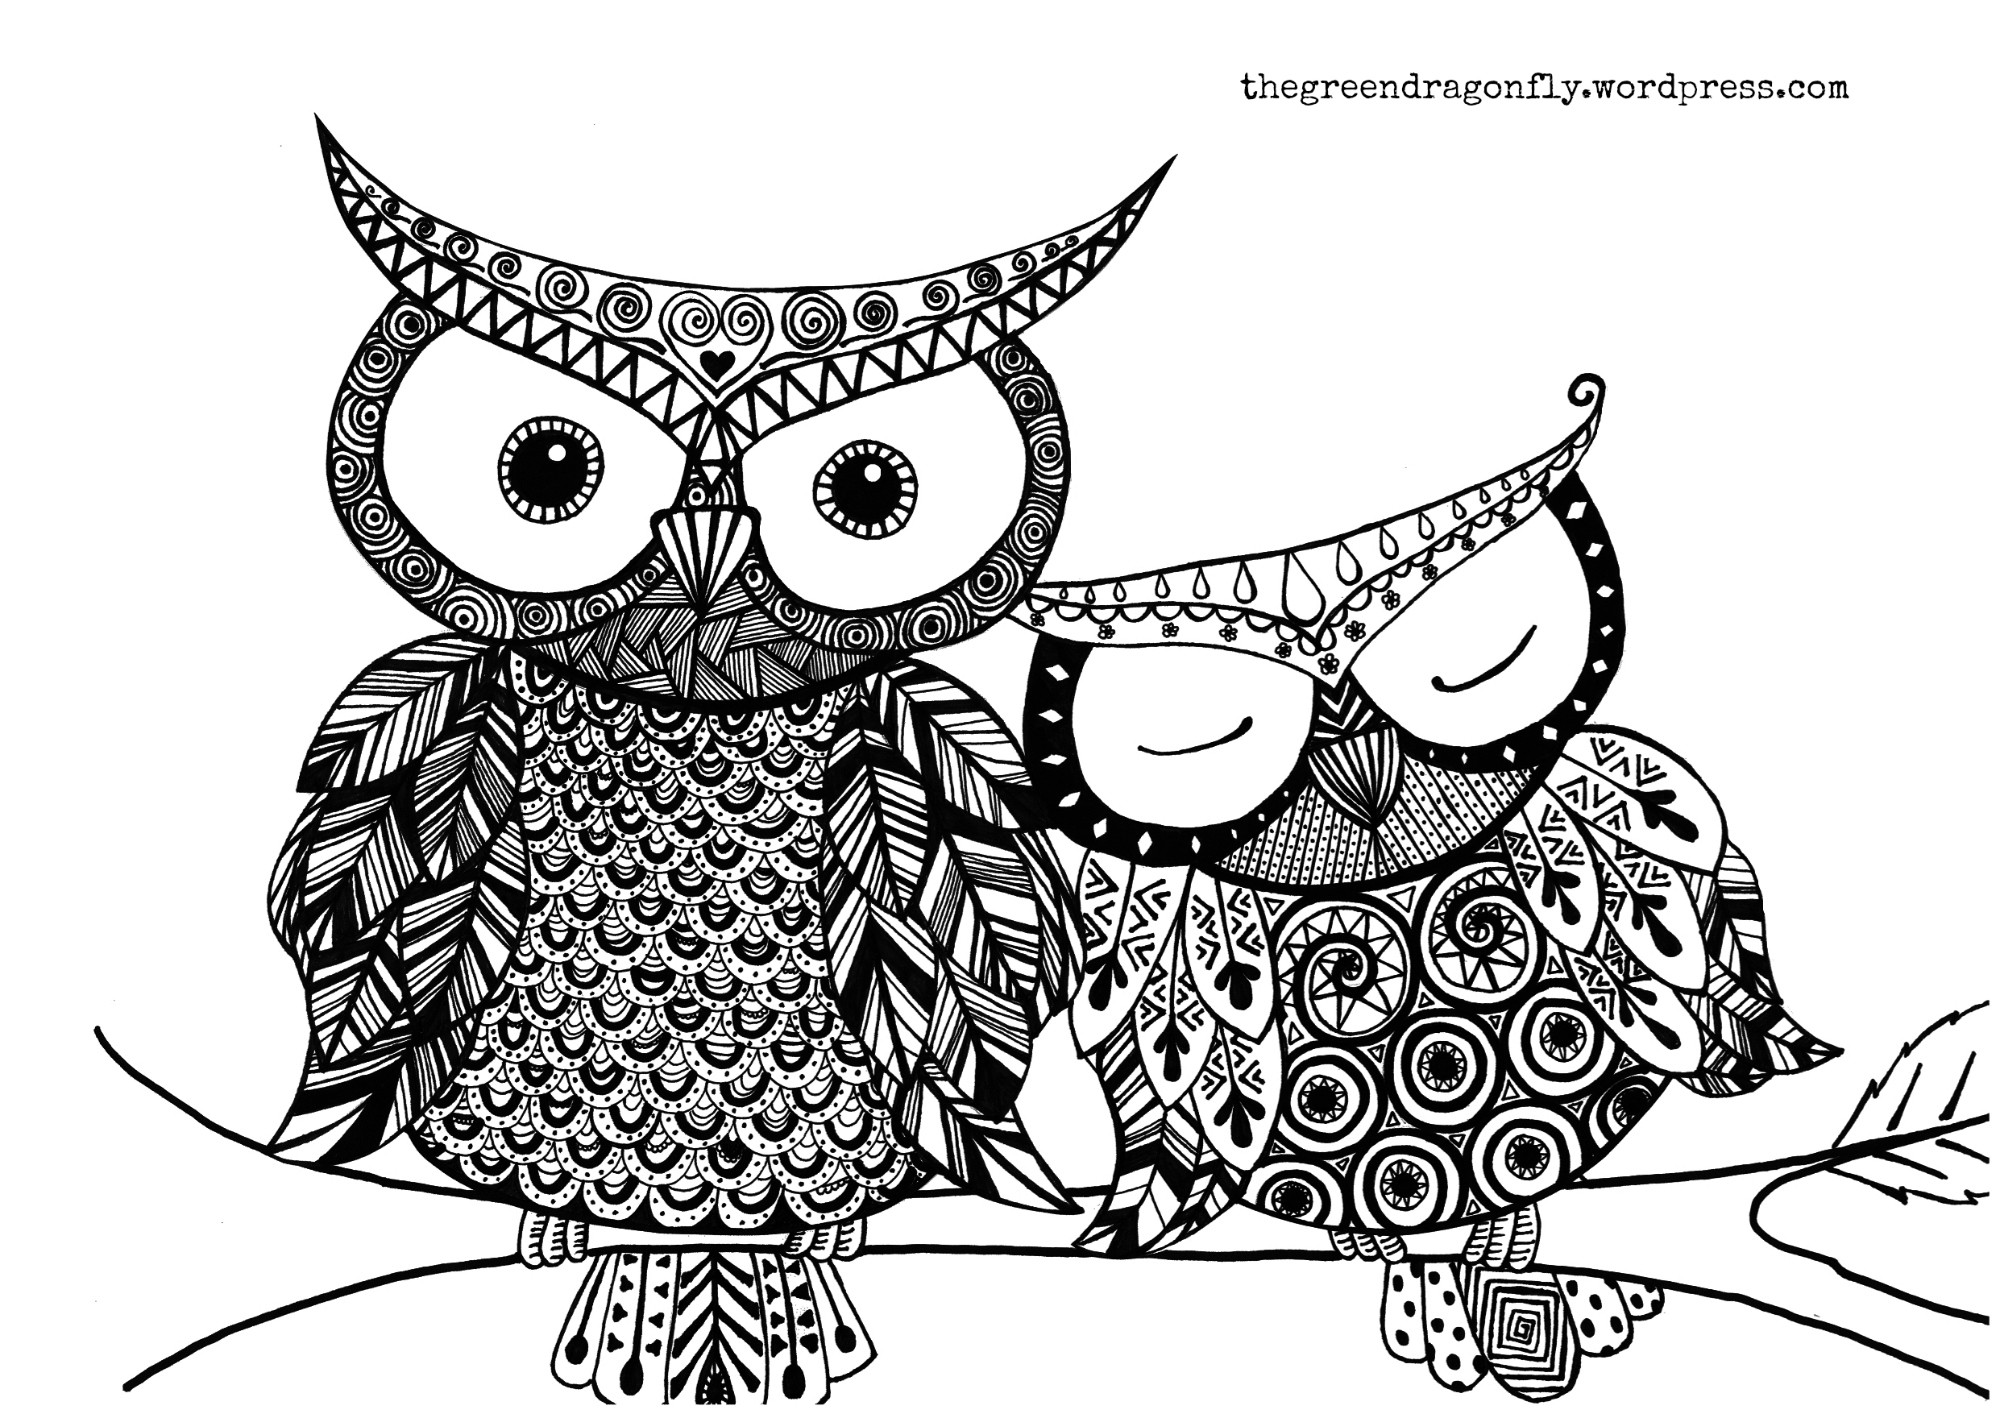 Owl Coloring Pages Printable
 Coloring sheet – The Green Dragonfly